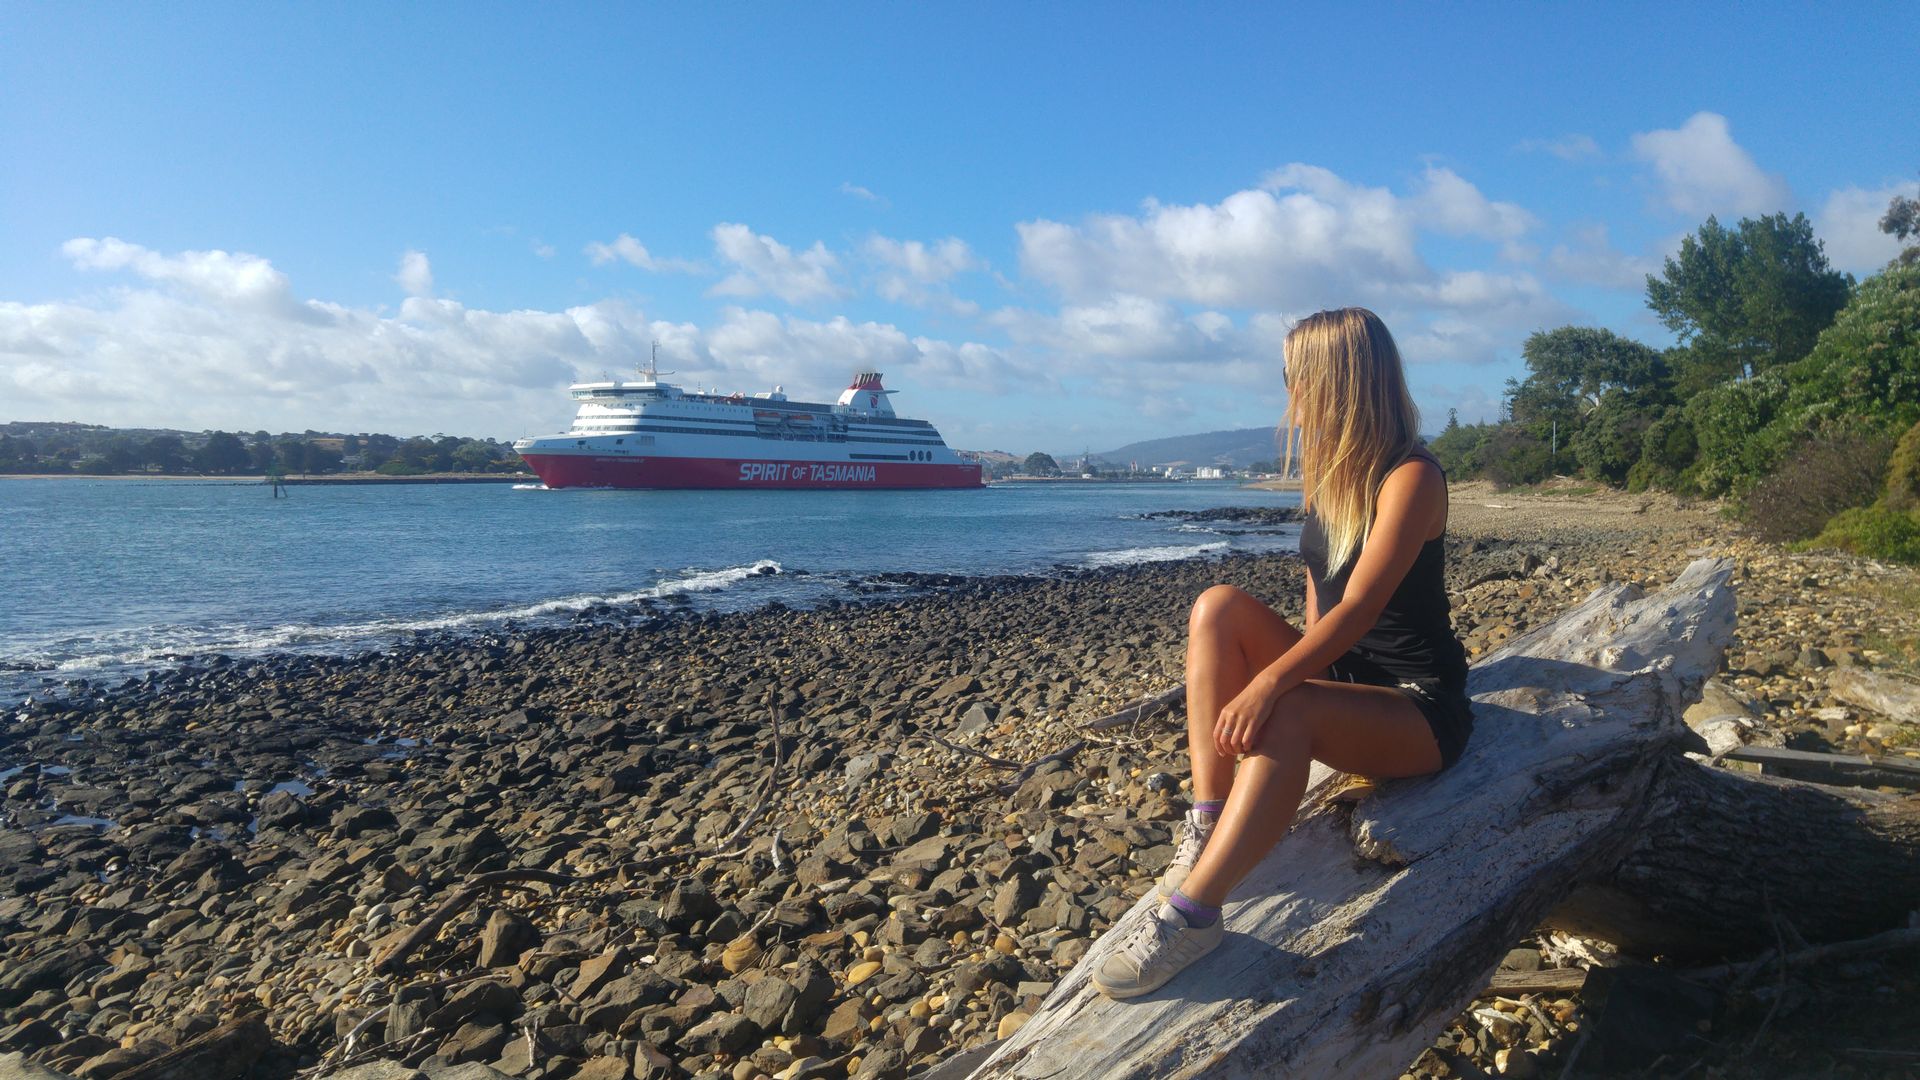 Spirit of Tasmania ferry sails out of the port again